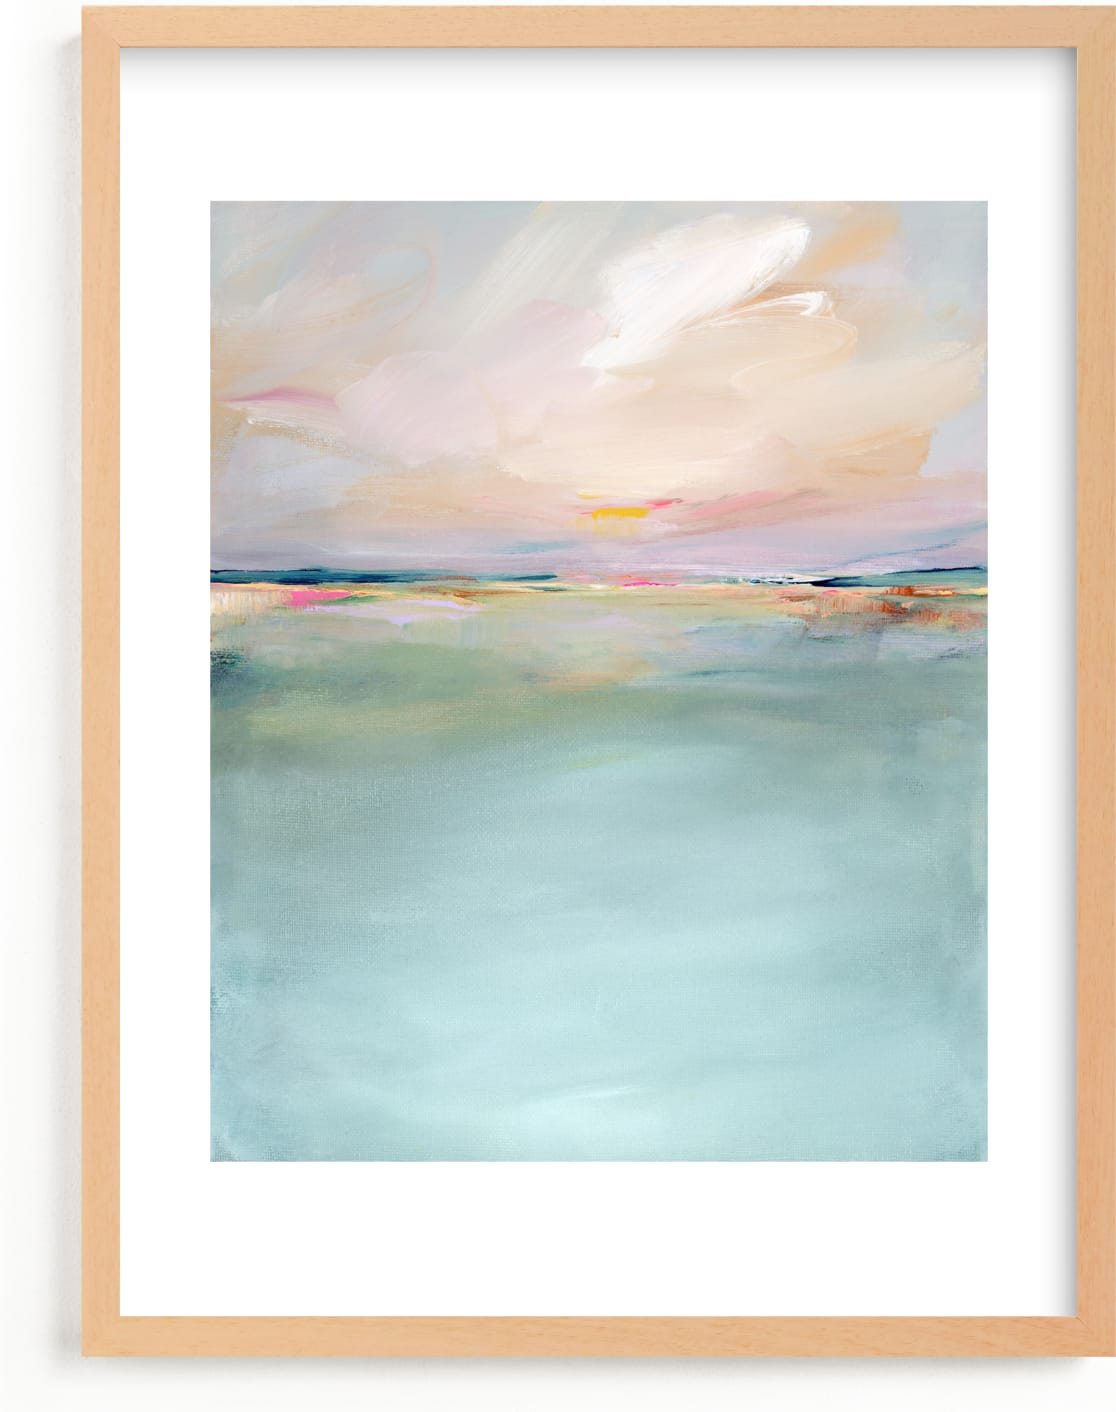 This is a blue art by Lindsay Megahed called Summer Retreat.